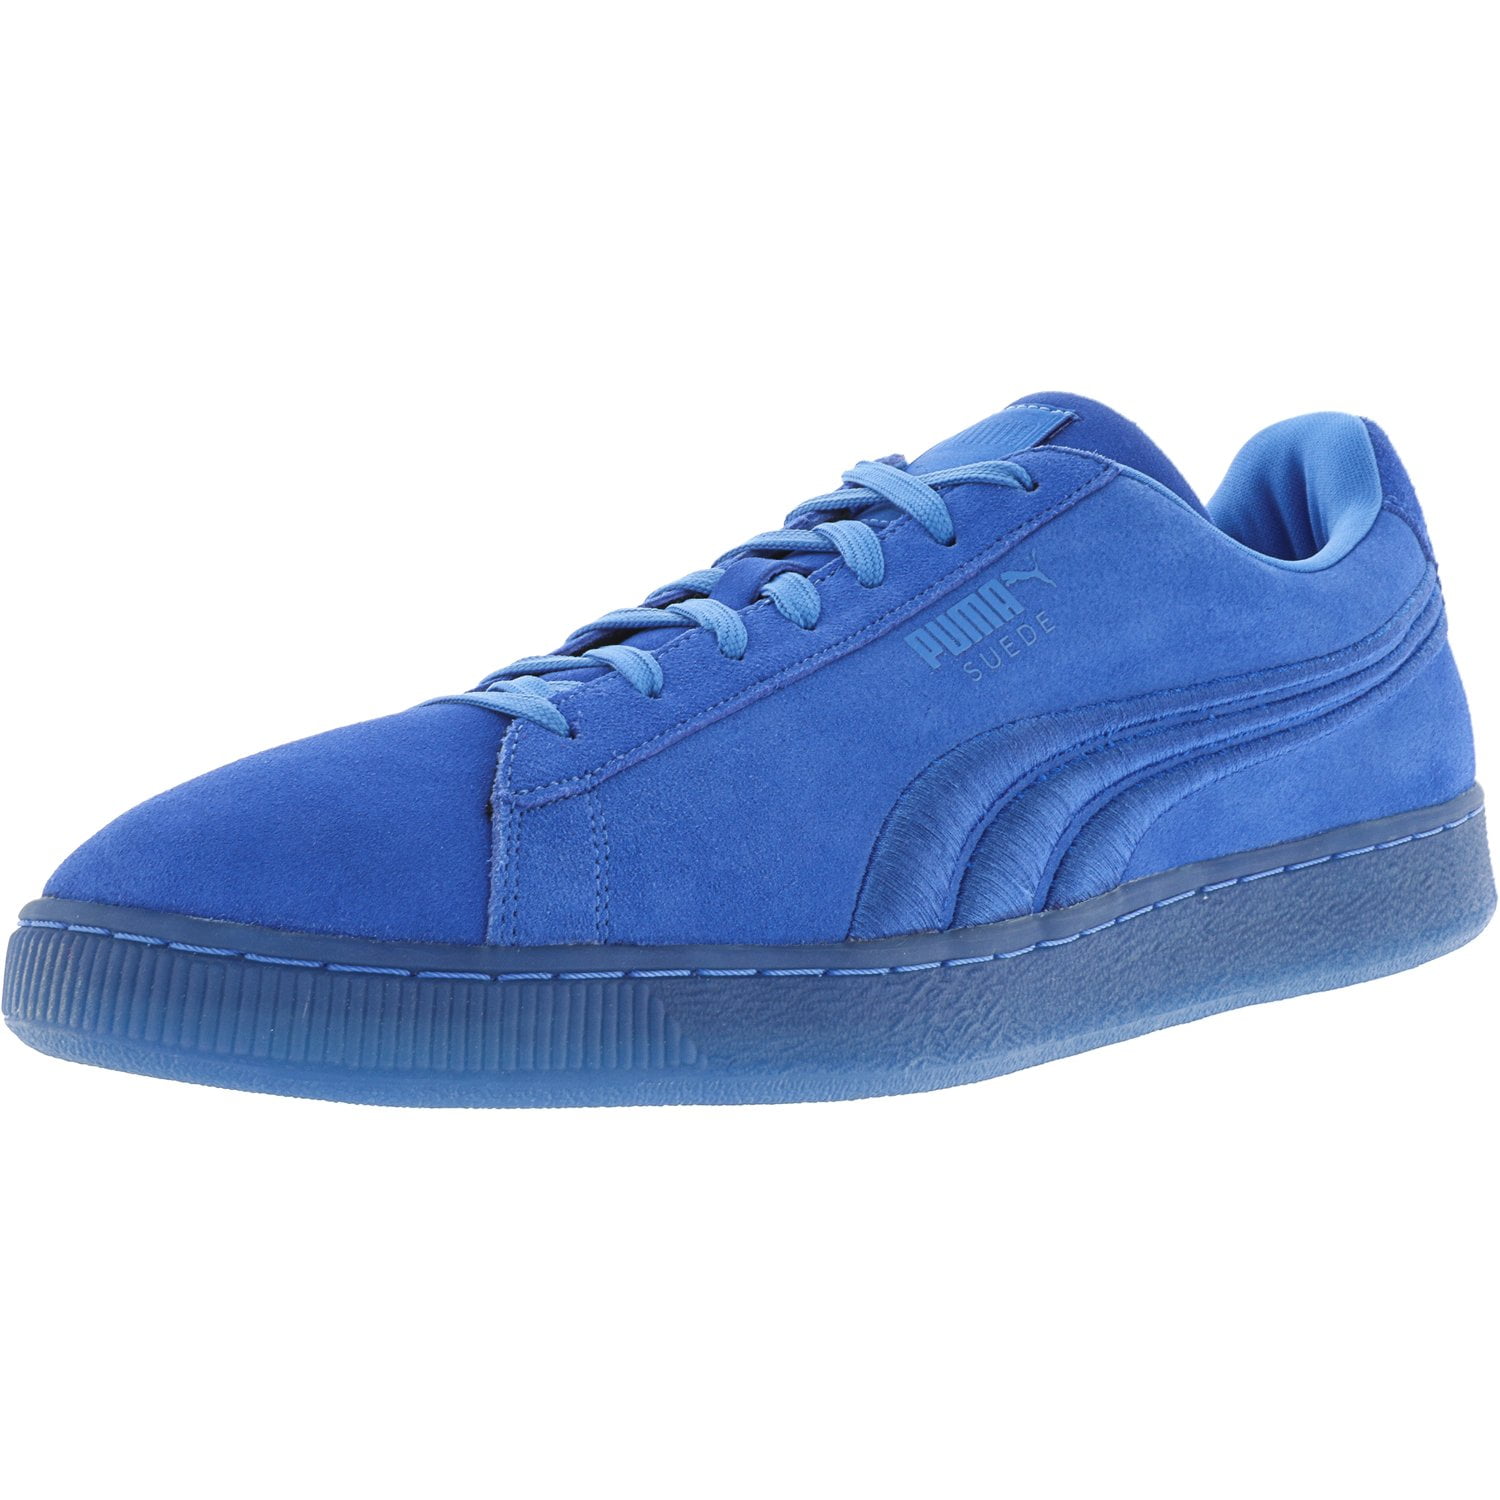  Puma Mens Suede Classic Pastime Lace Up Sneakers Shoes Casual  - Blue - Size 9 M